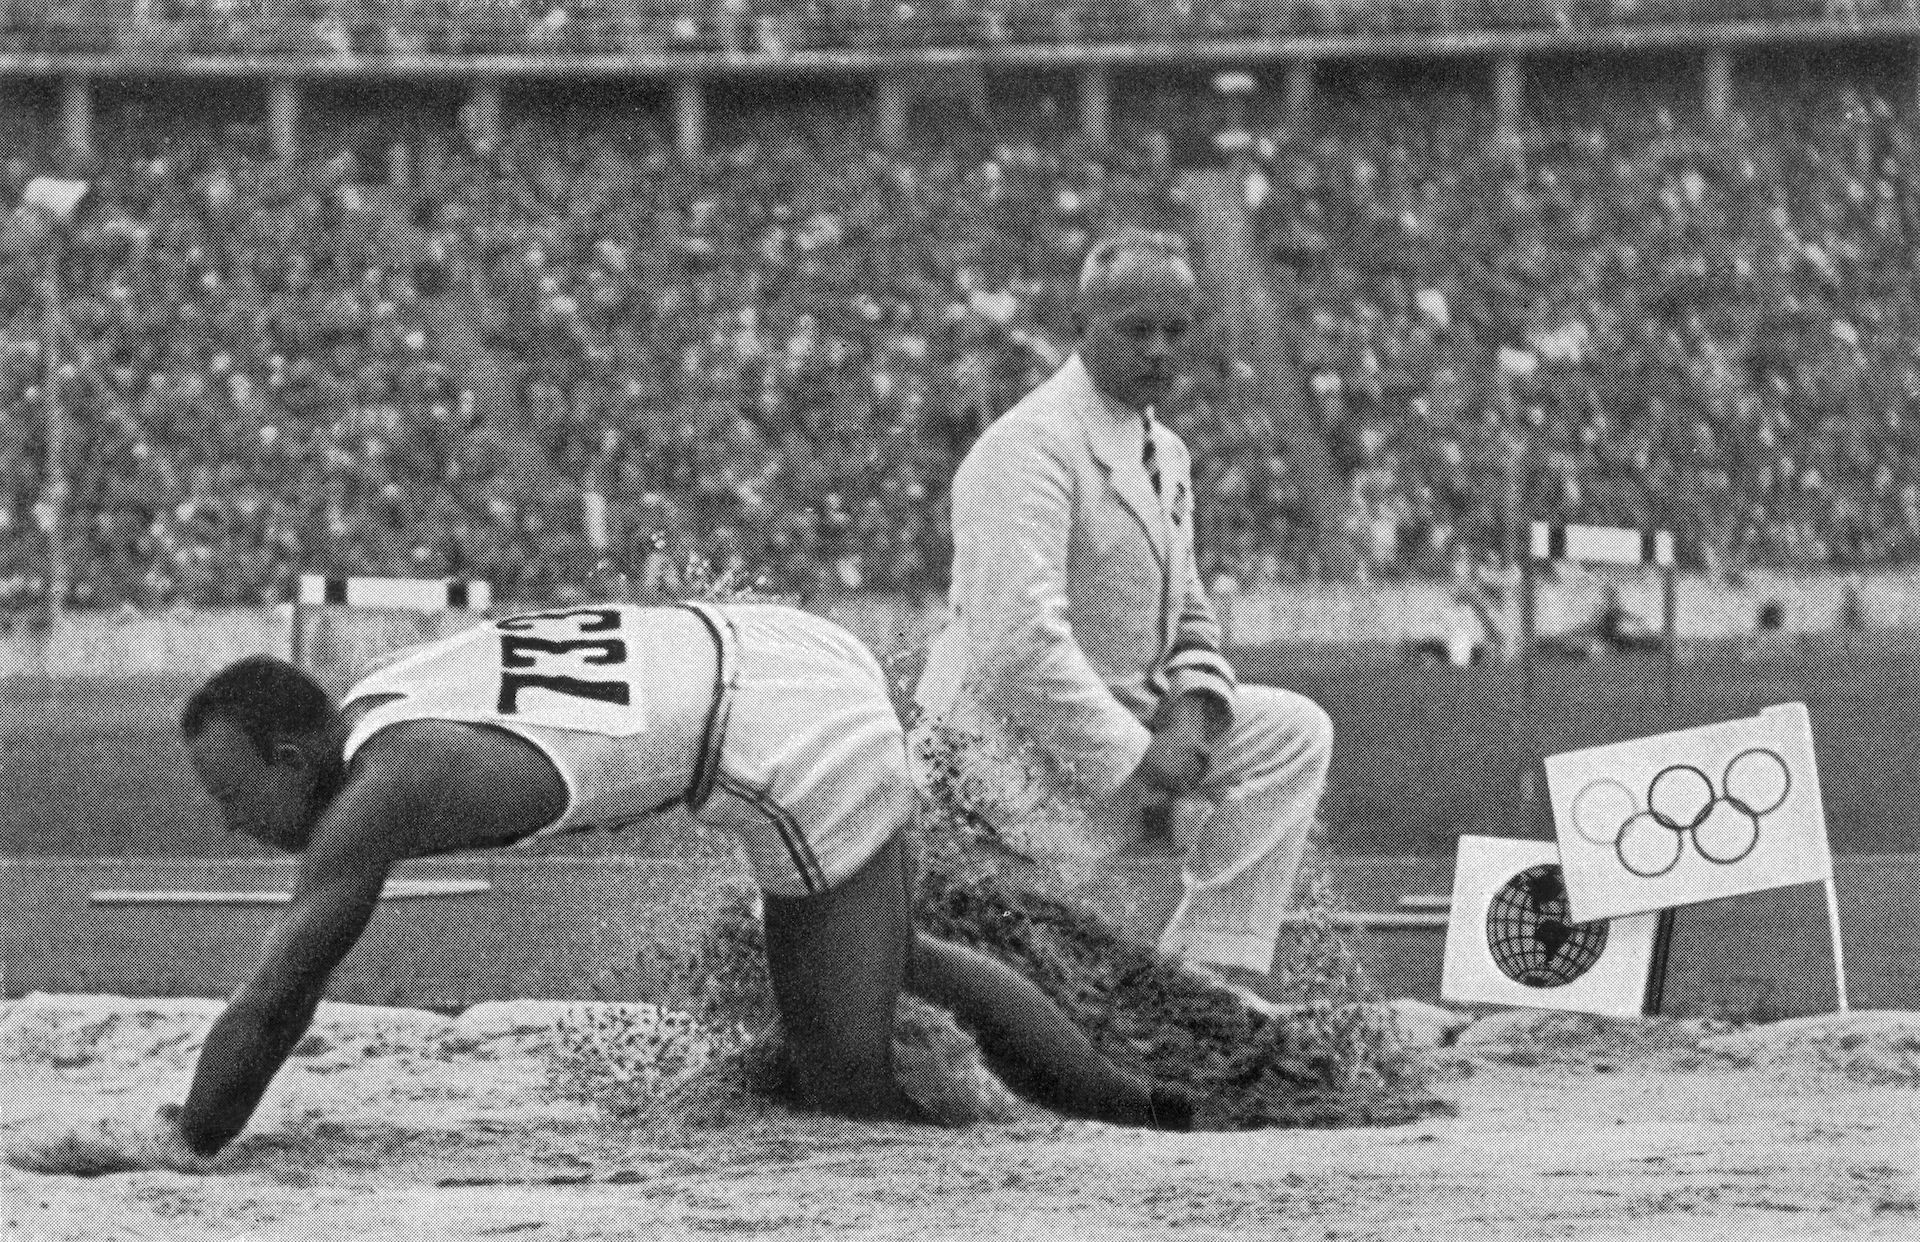 Jesse Owens' granddaughter unveils World Heritage Plaque to mark 'Day of Days'